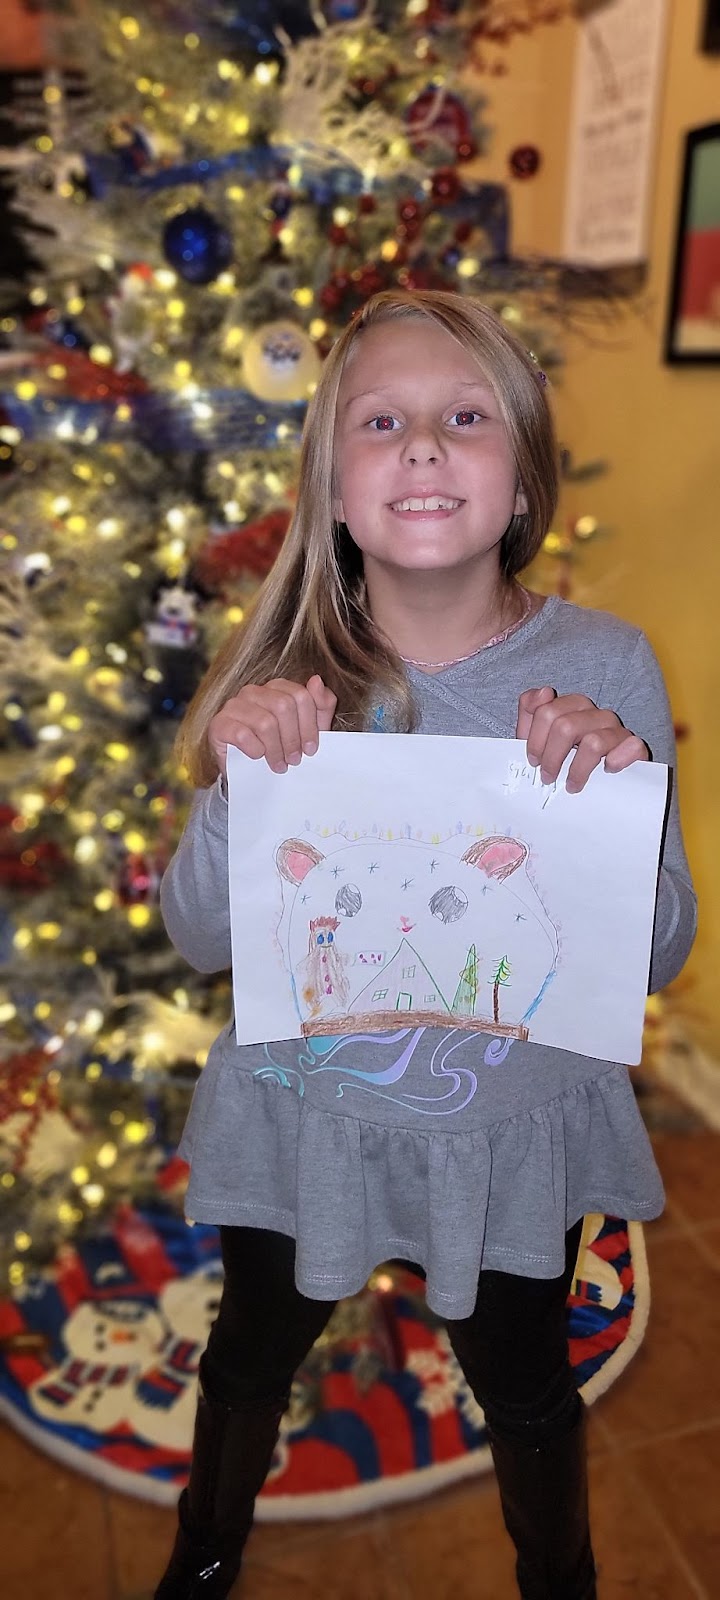 the winner of our holiday card contest, Gabriella, poses with her drawing